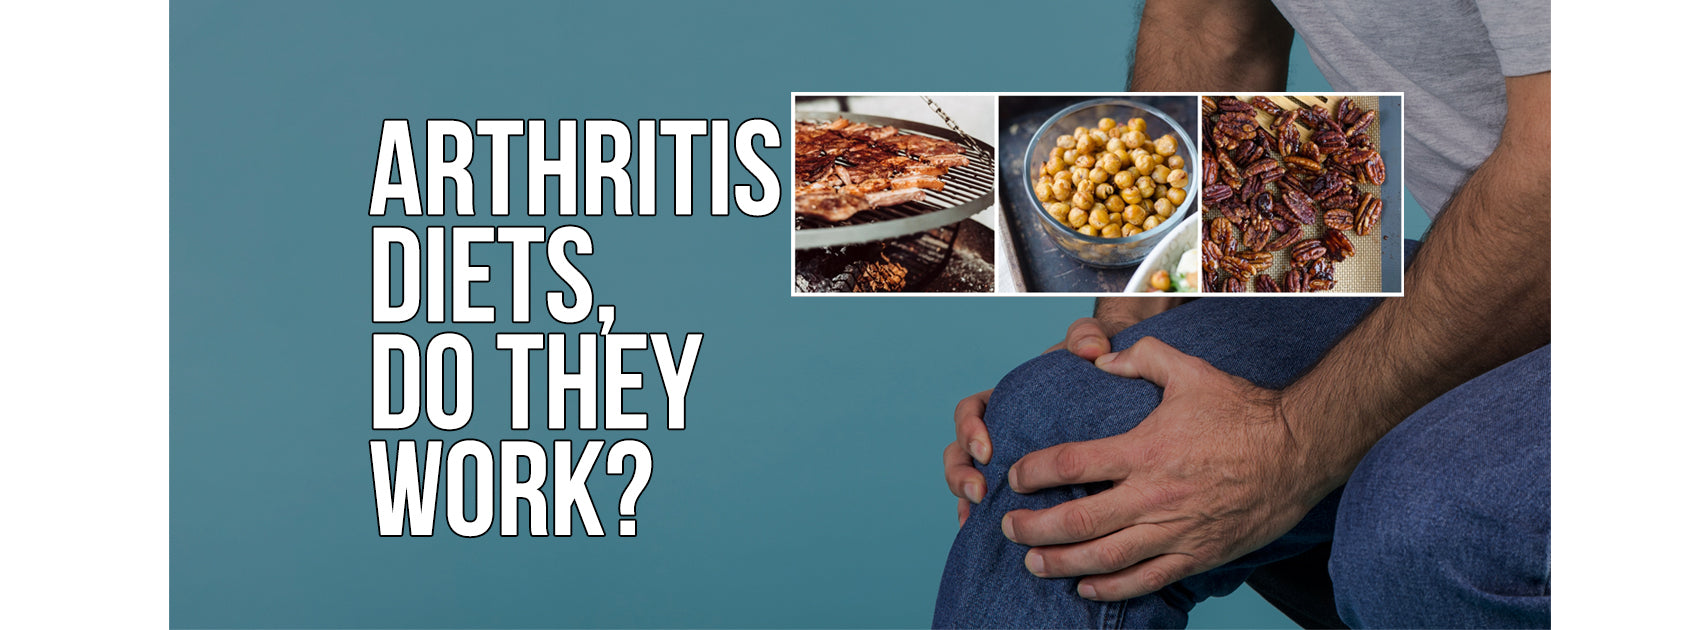 ARTHRITIS DIETS, DO THEY WORK? THE NUTRITIONAL HEALING OPTION